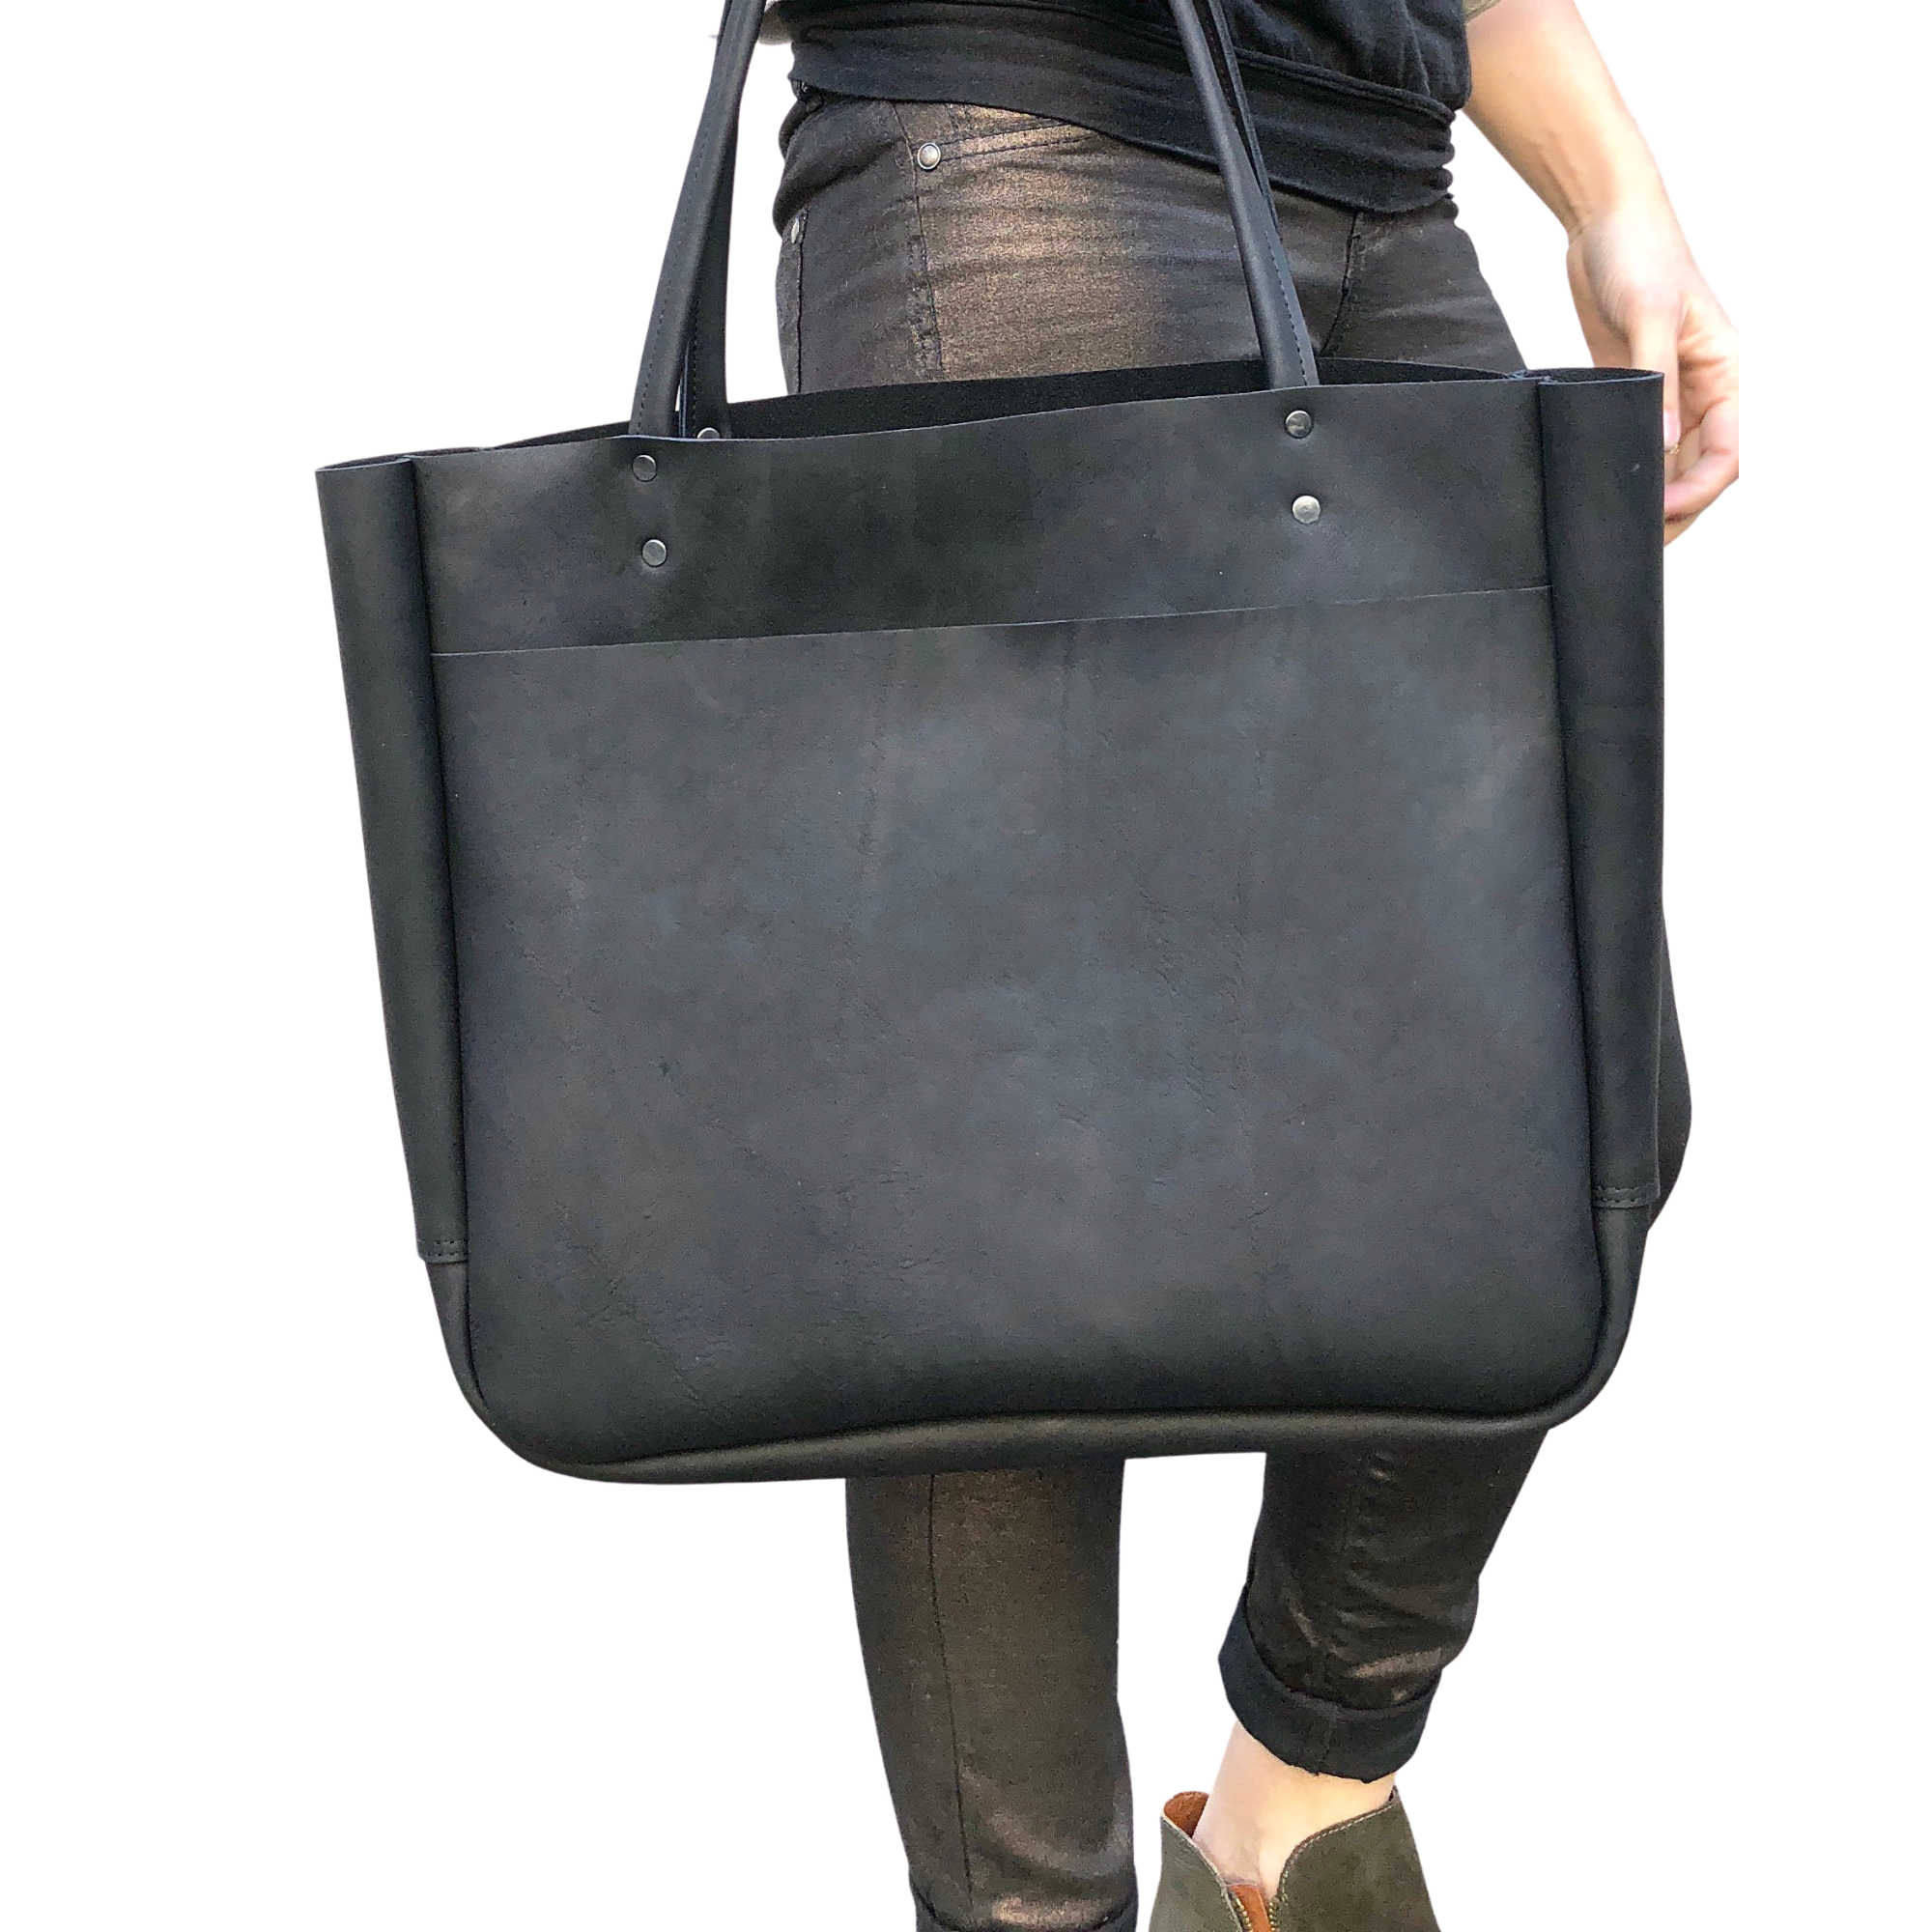 Large leather tote bag with front pocket